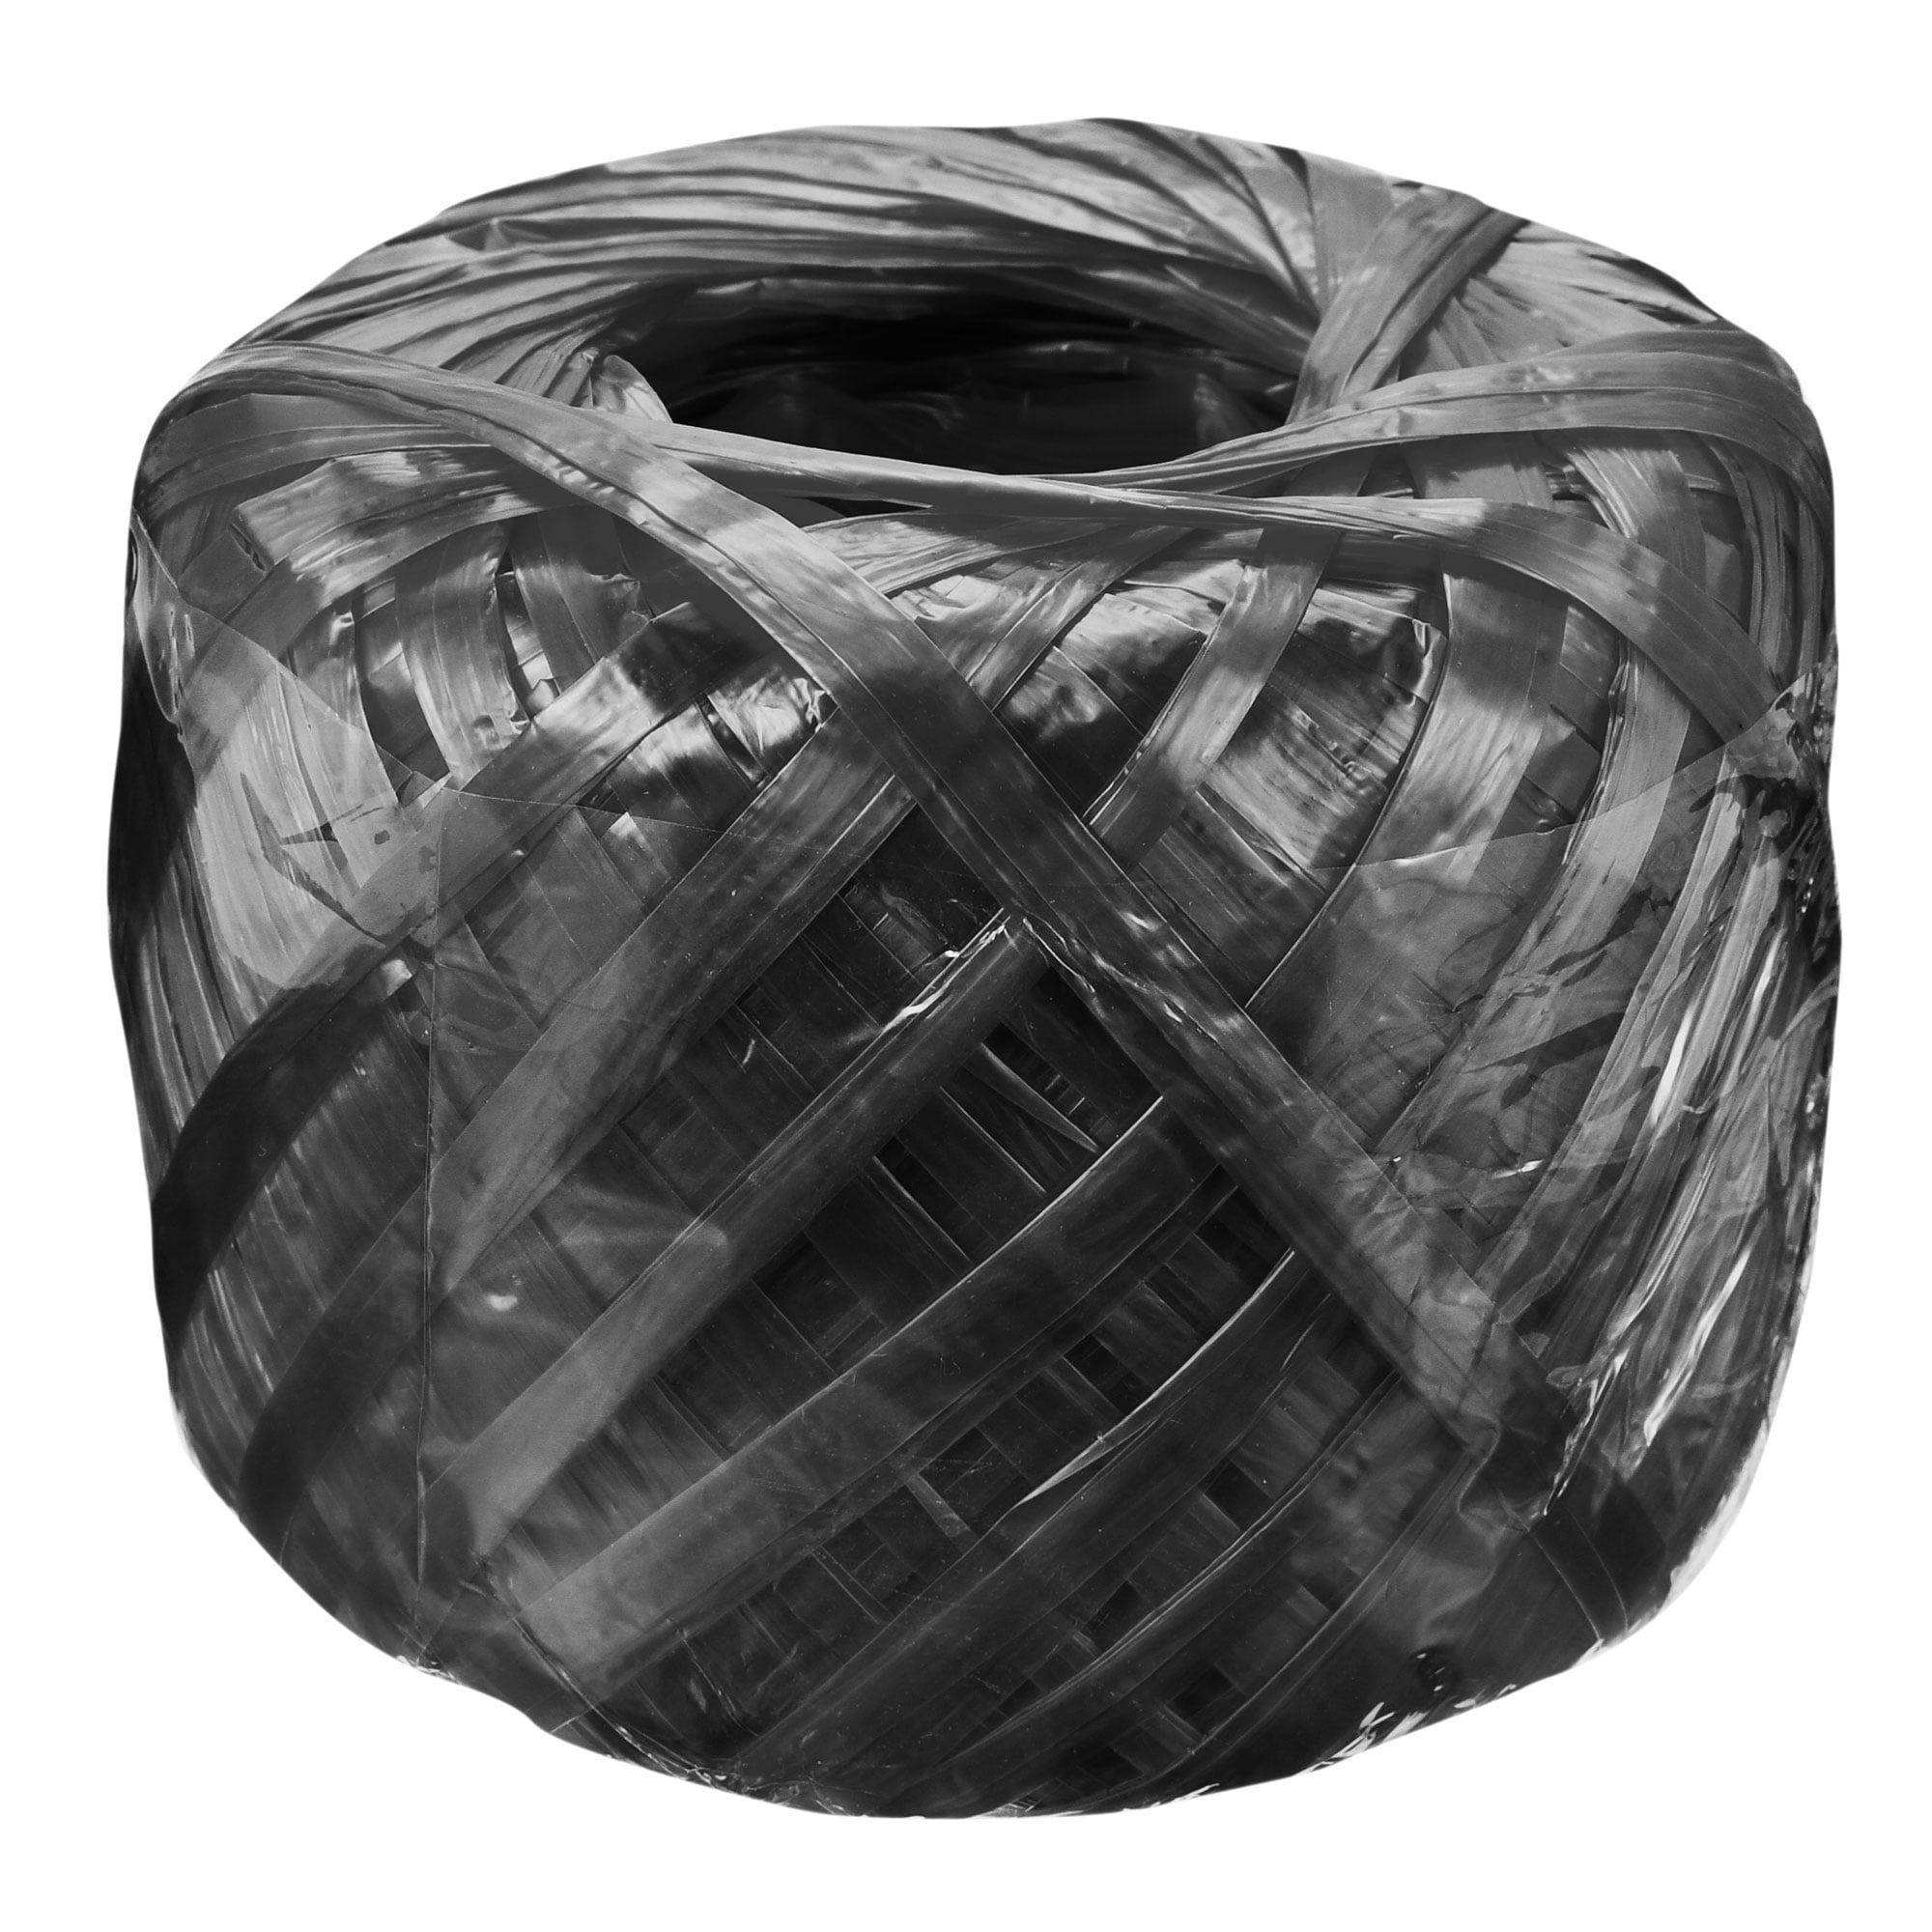 Uxcell Polyester Nylon Plastic Rope Twine Household Bundled for  Packing,150m/492ft Length Black 